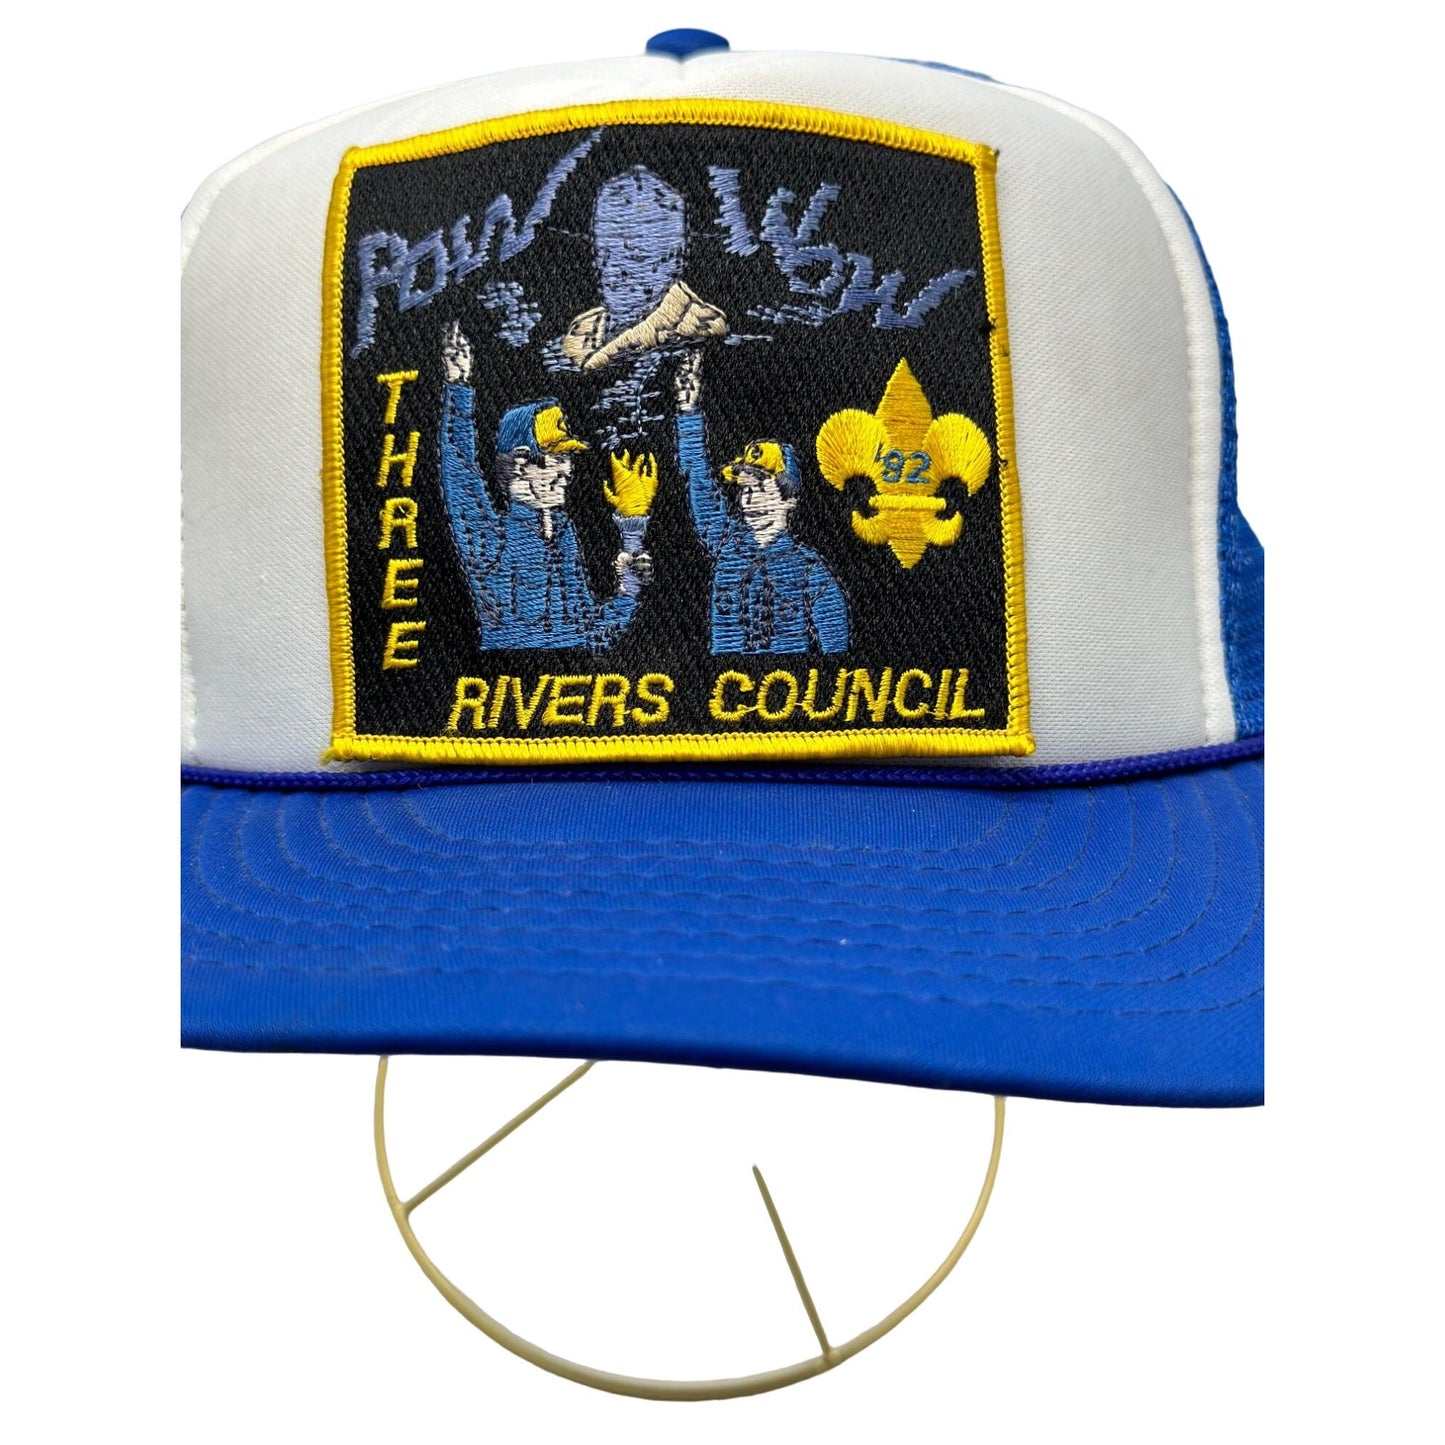 Vintage Blue Trucker Hat Cap Embroidered Pow Wow Three Rivers Council 1982